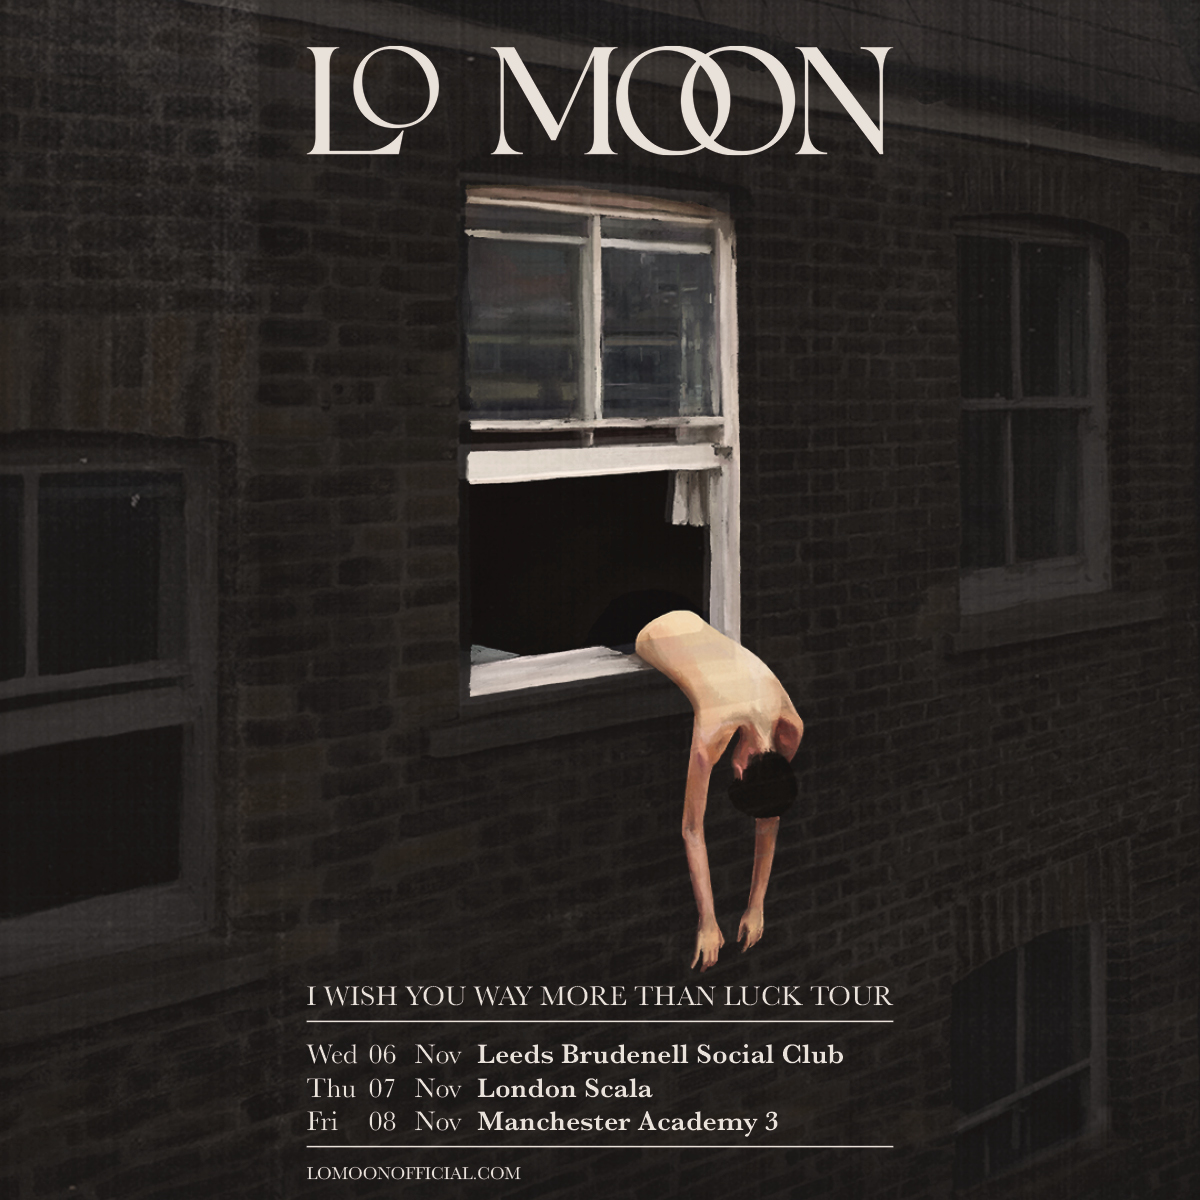 Tickets are NOW LIVE for Lo Moon's upcoming tour this fall! The nine date UK & EU tour will include the band’s biggest UK headline show to date at our very own Scala on November 7th. Get yours while they last: scala.co.uk/events/lo-moon